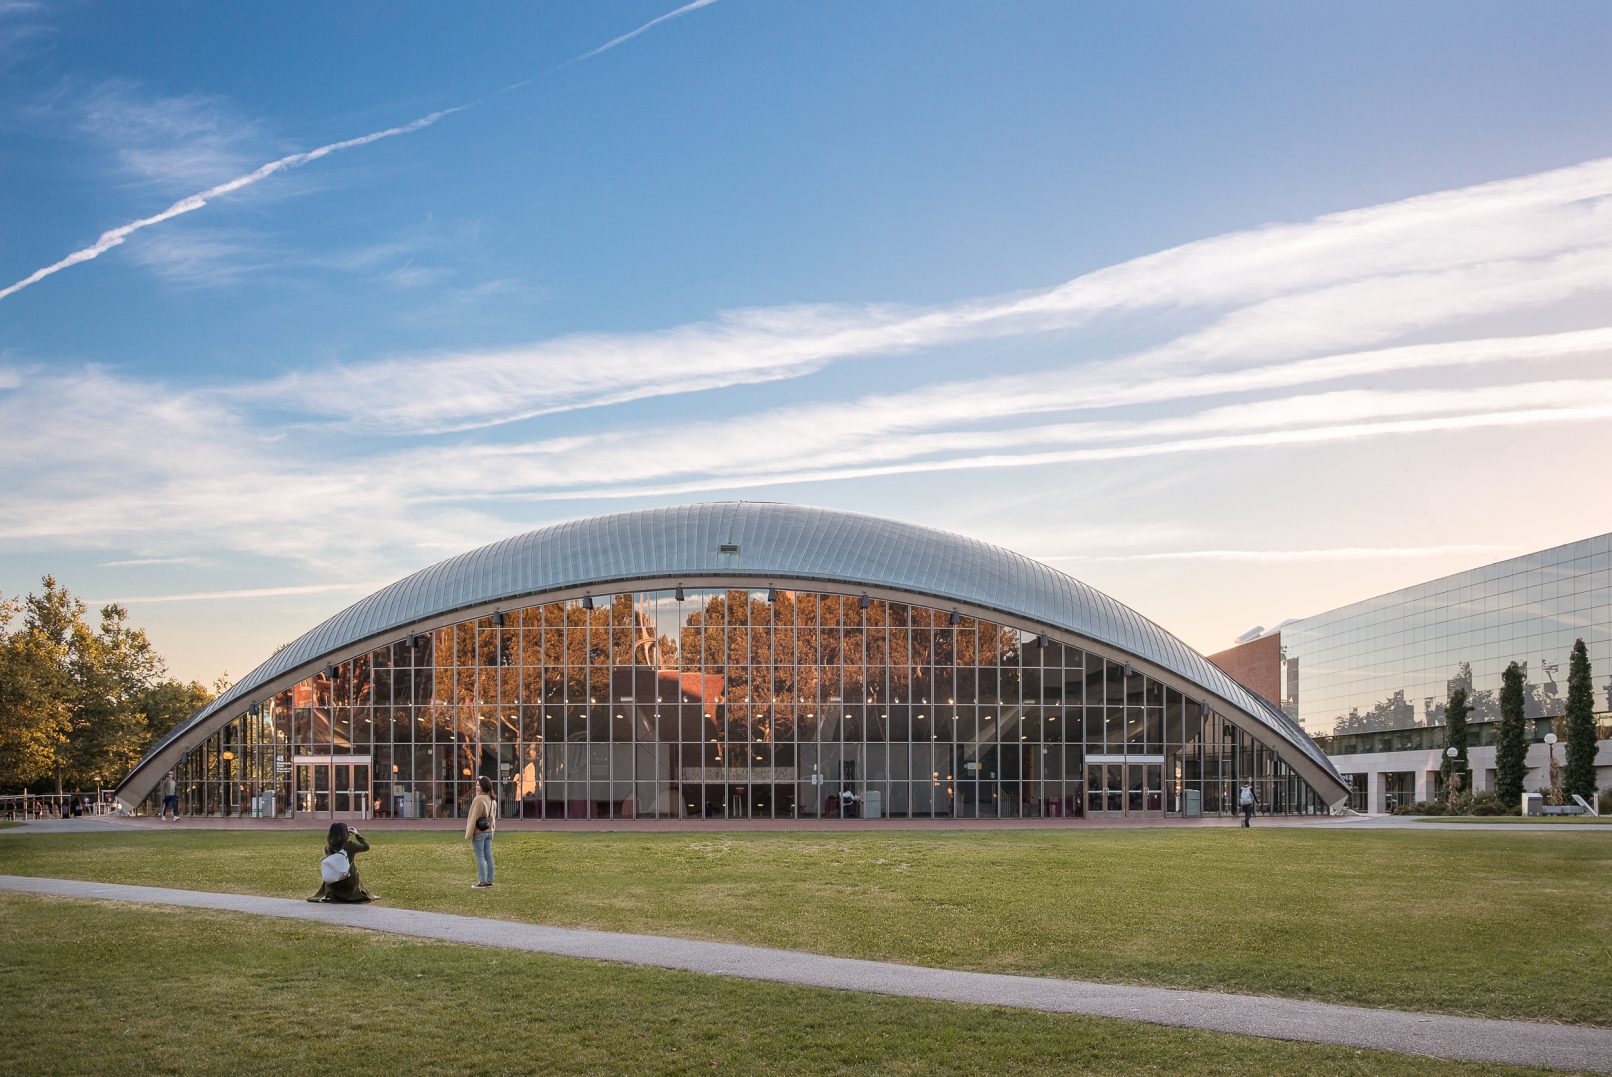 Architectural photography of the Kresge Auditorium at MIT in Boston Massachusetts designed by Eero Saarinen featuring a one point perspective during the golden hour